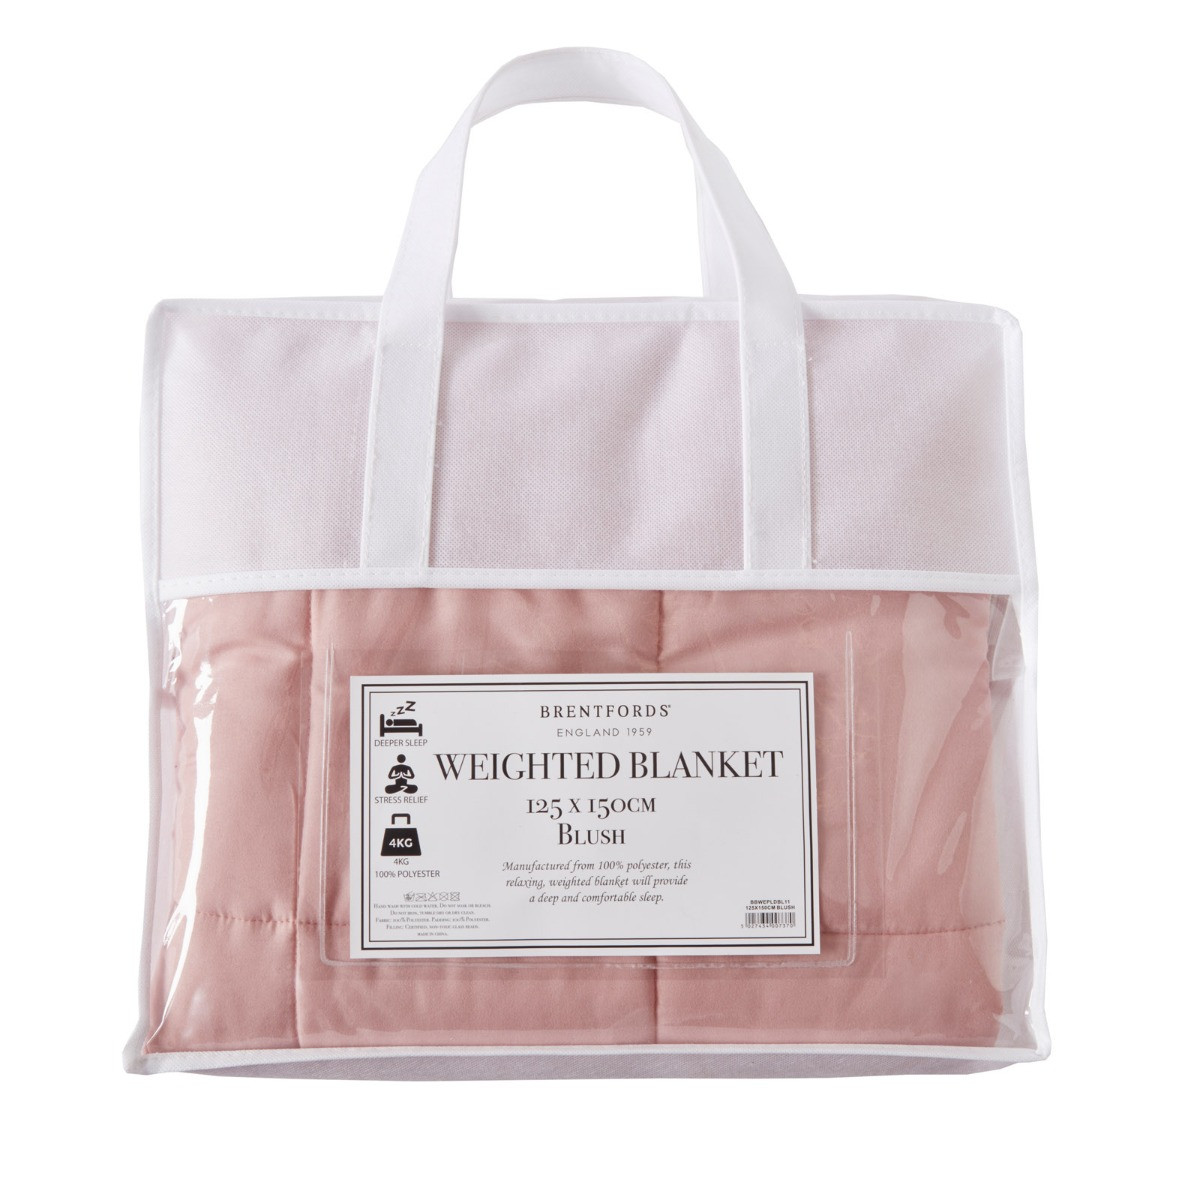 Brentfords Weighted Blanket Quilted - Blush Pink>